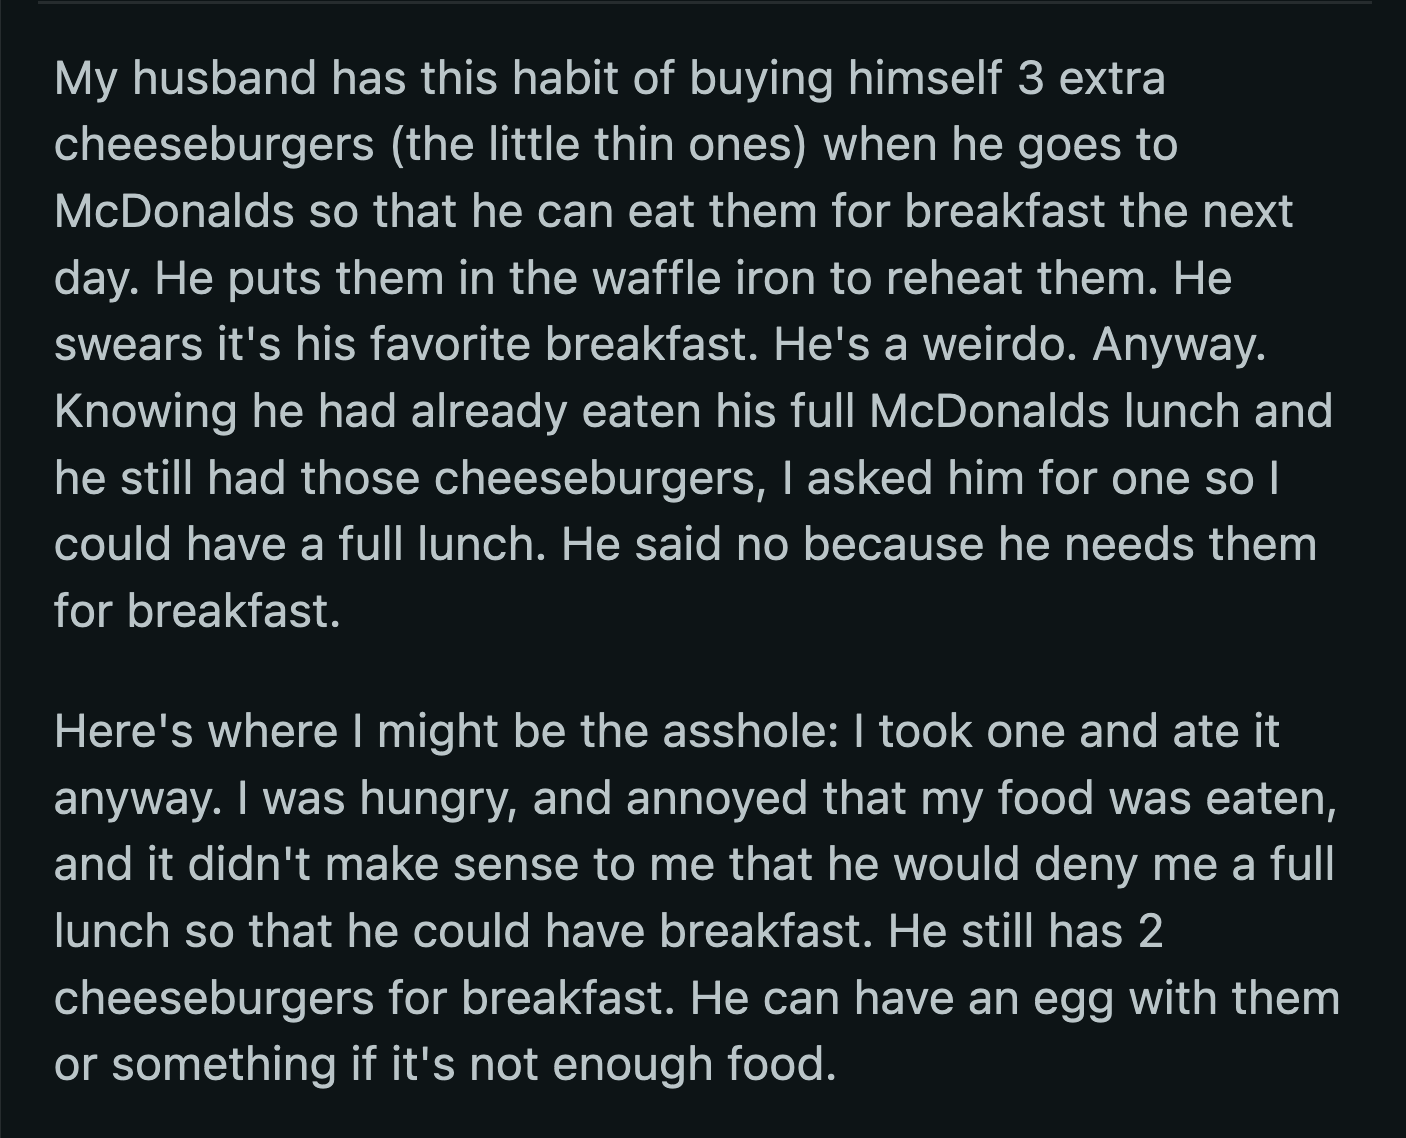 OP's husband got mad. He said it wasn't the same with what happened to her nuggets because he wasn't aware of how much their kids ate.